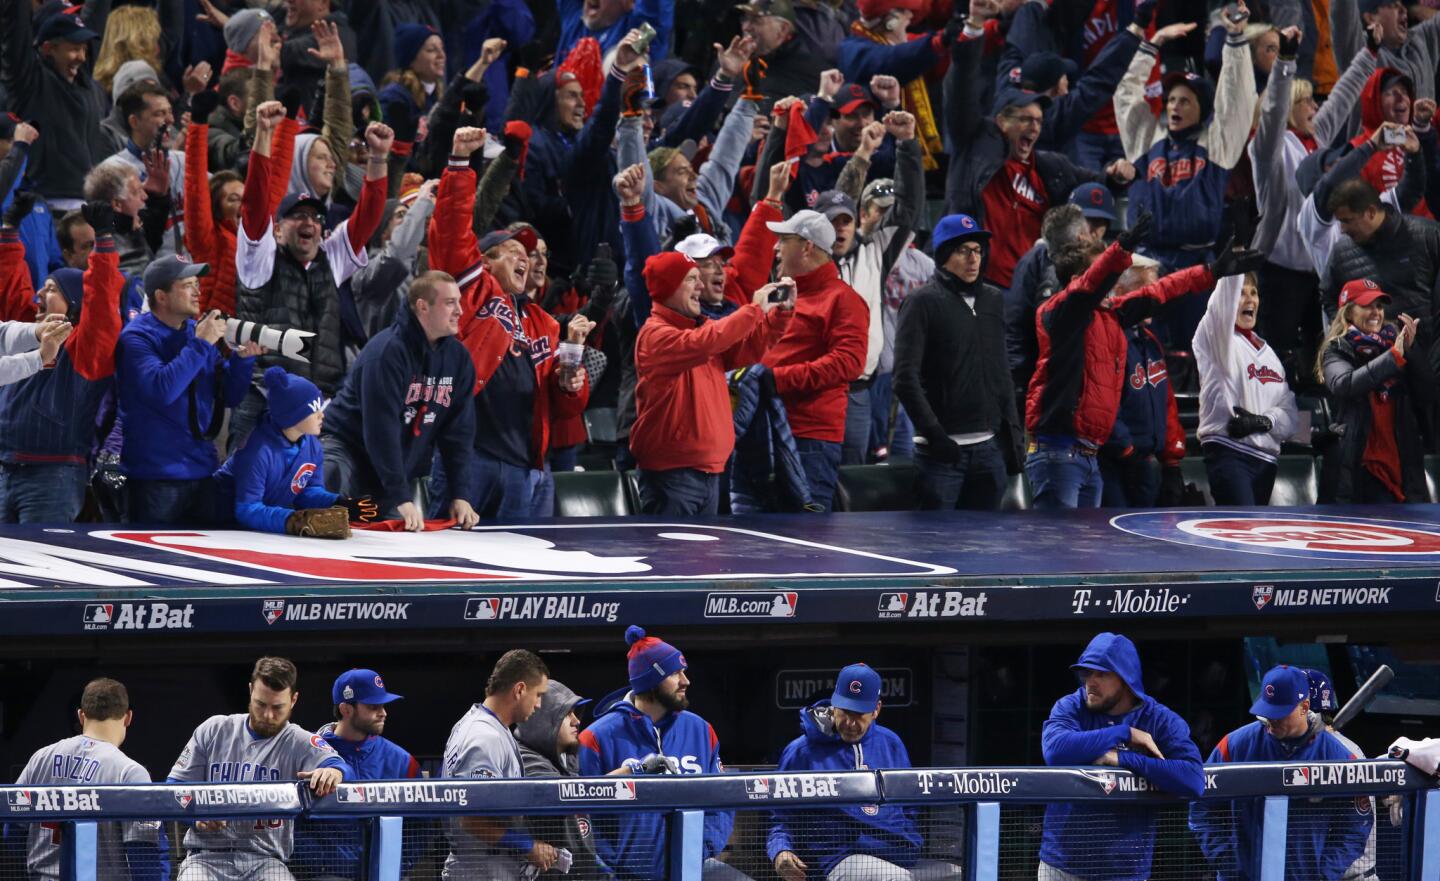 Indians blank Cubs in Game 1 of the World Series